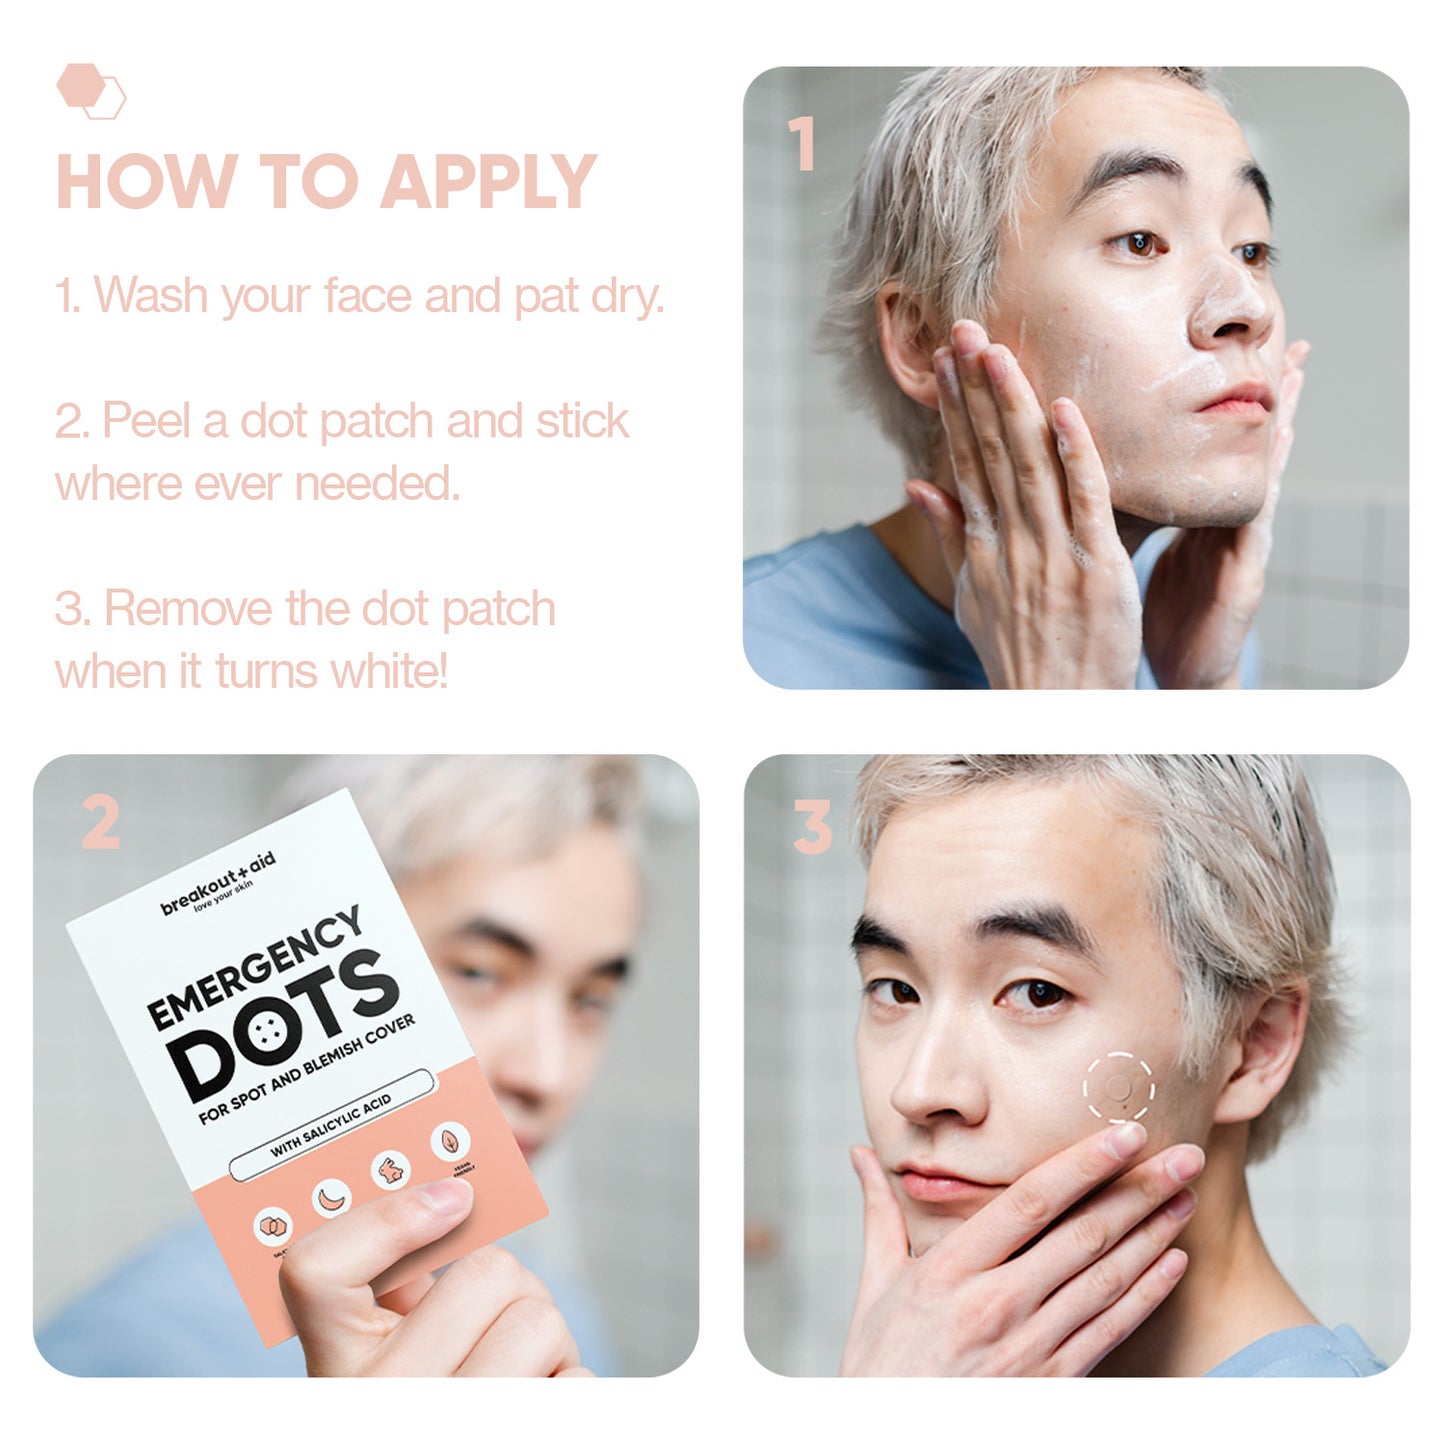 Emergency Dots for spots and blemishes with Salicylic Acid